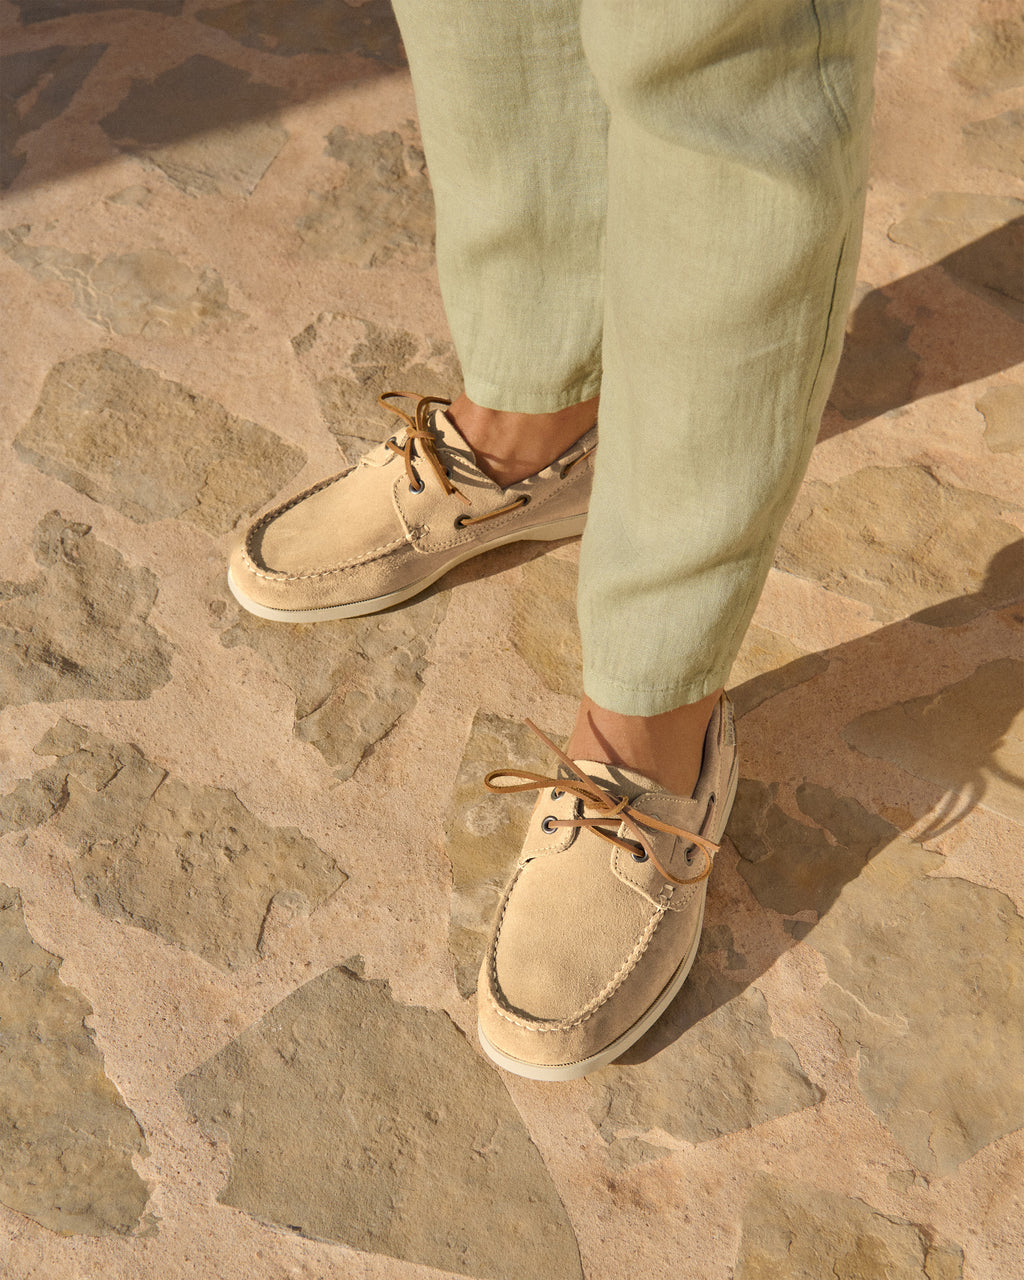 Suede Boat-Shoes - Hamptons Champagne Beige